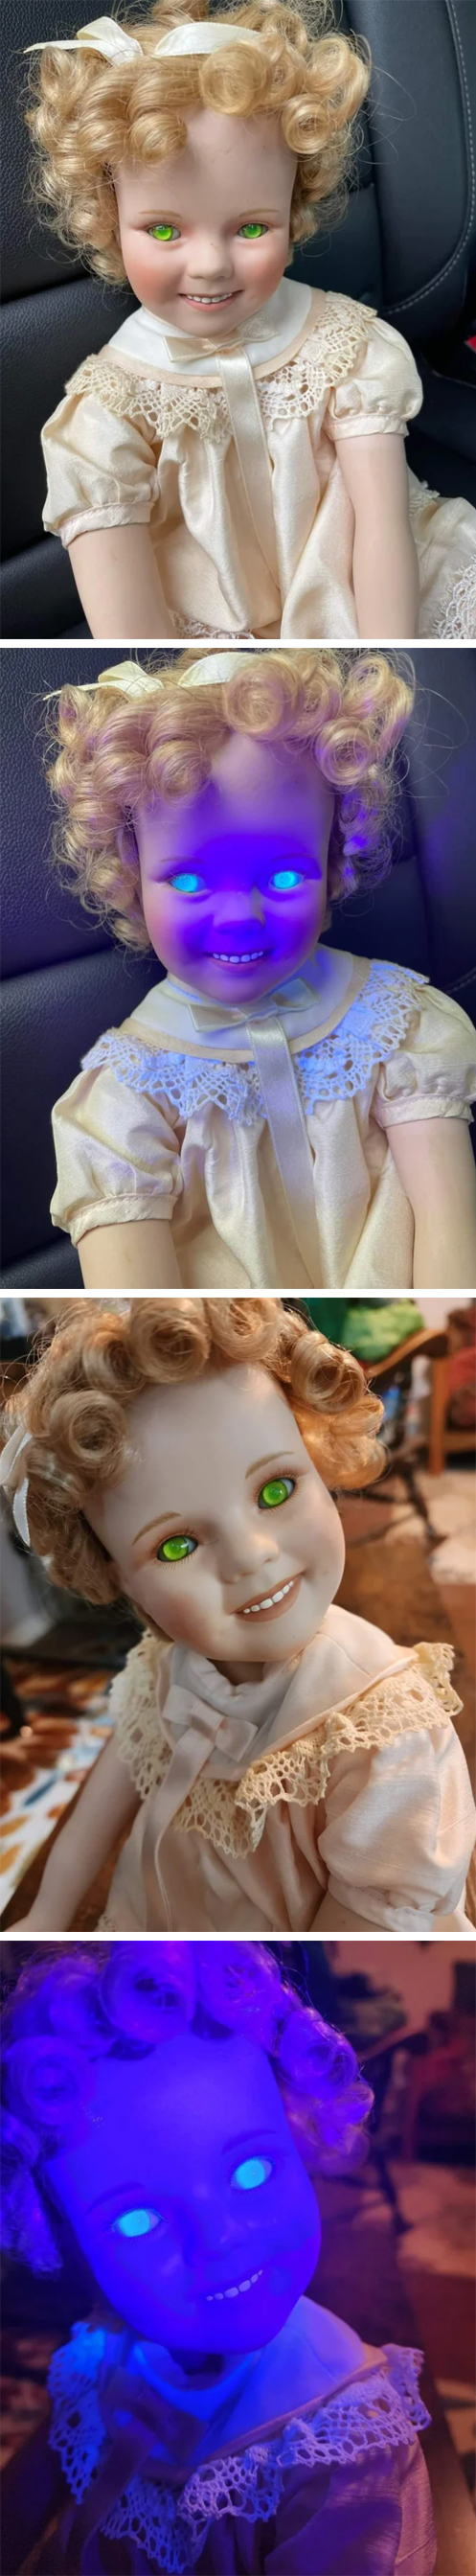 A Shirley Temple doll with glowing eyes